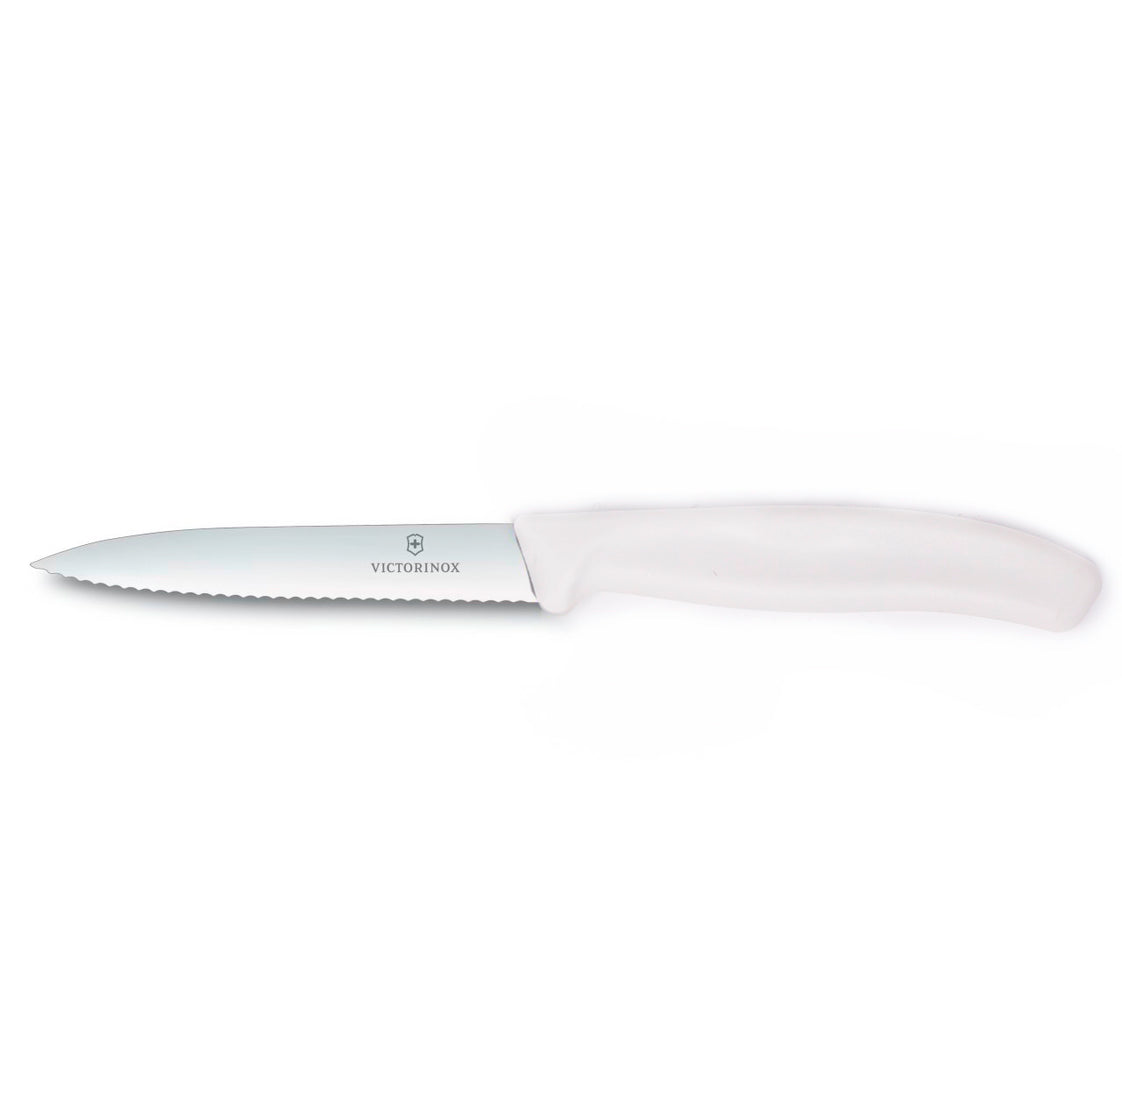 Victorinox 4” Serrated Paring Knife  - Assorted Colors